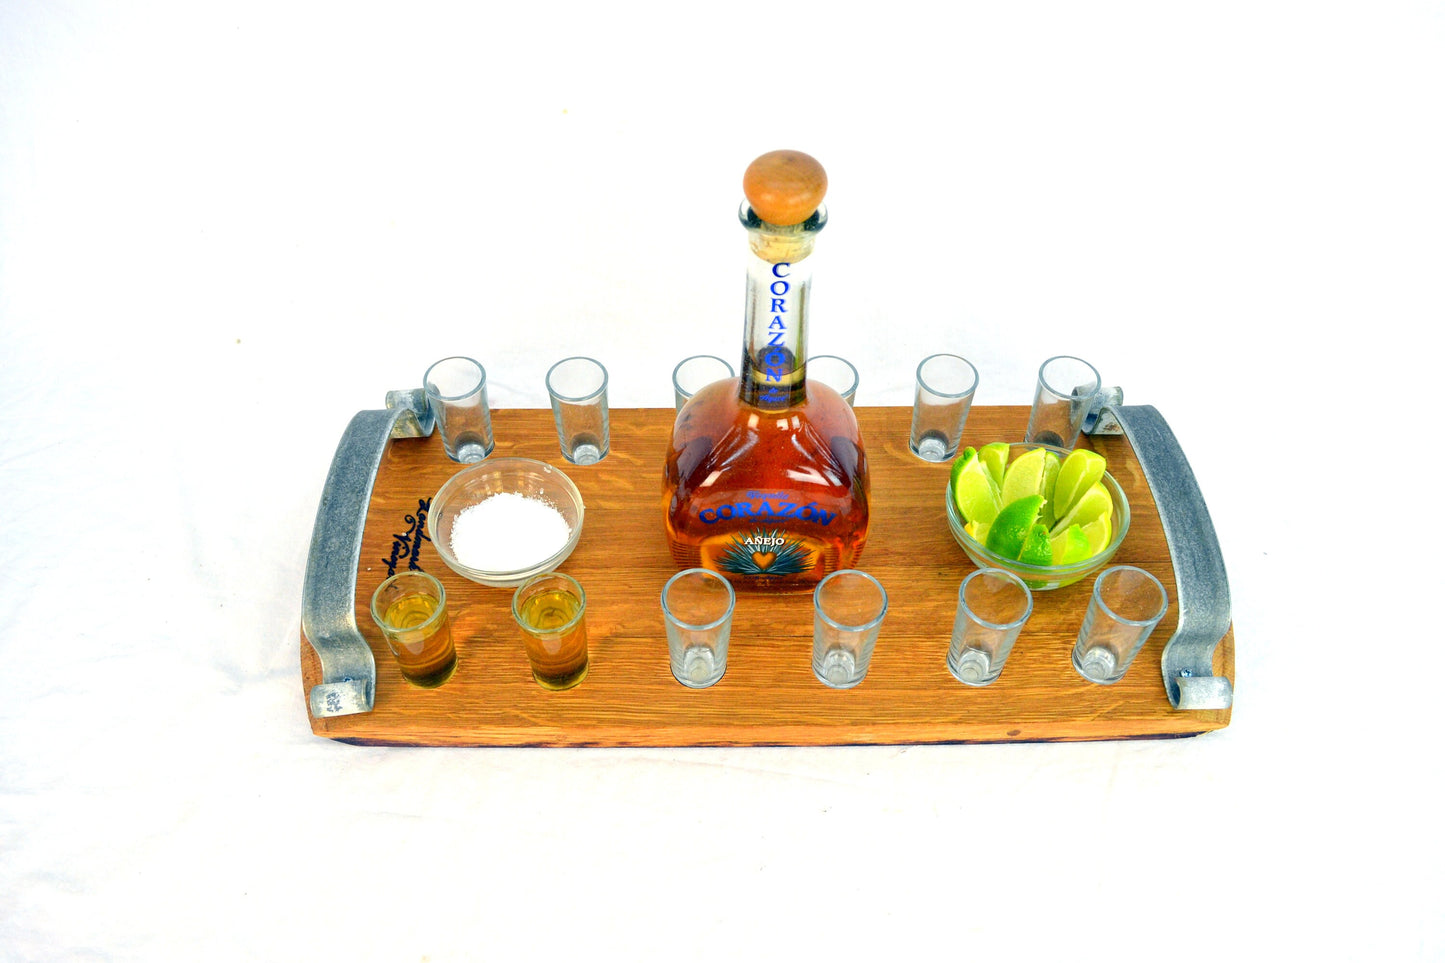 Tequila Sampler Tray - Zabava - Made from retired California wine barrels. 100% Recycled!